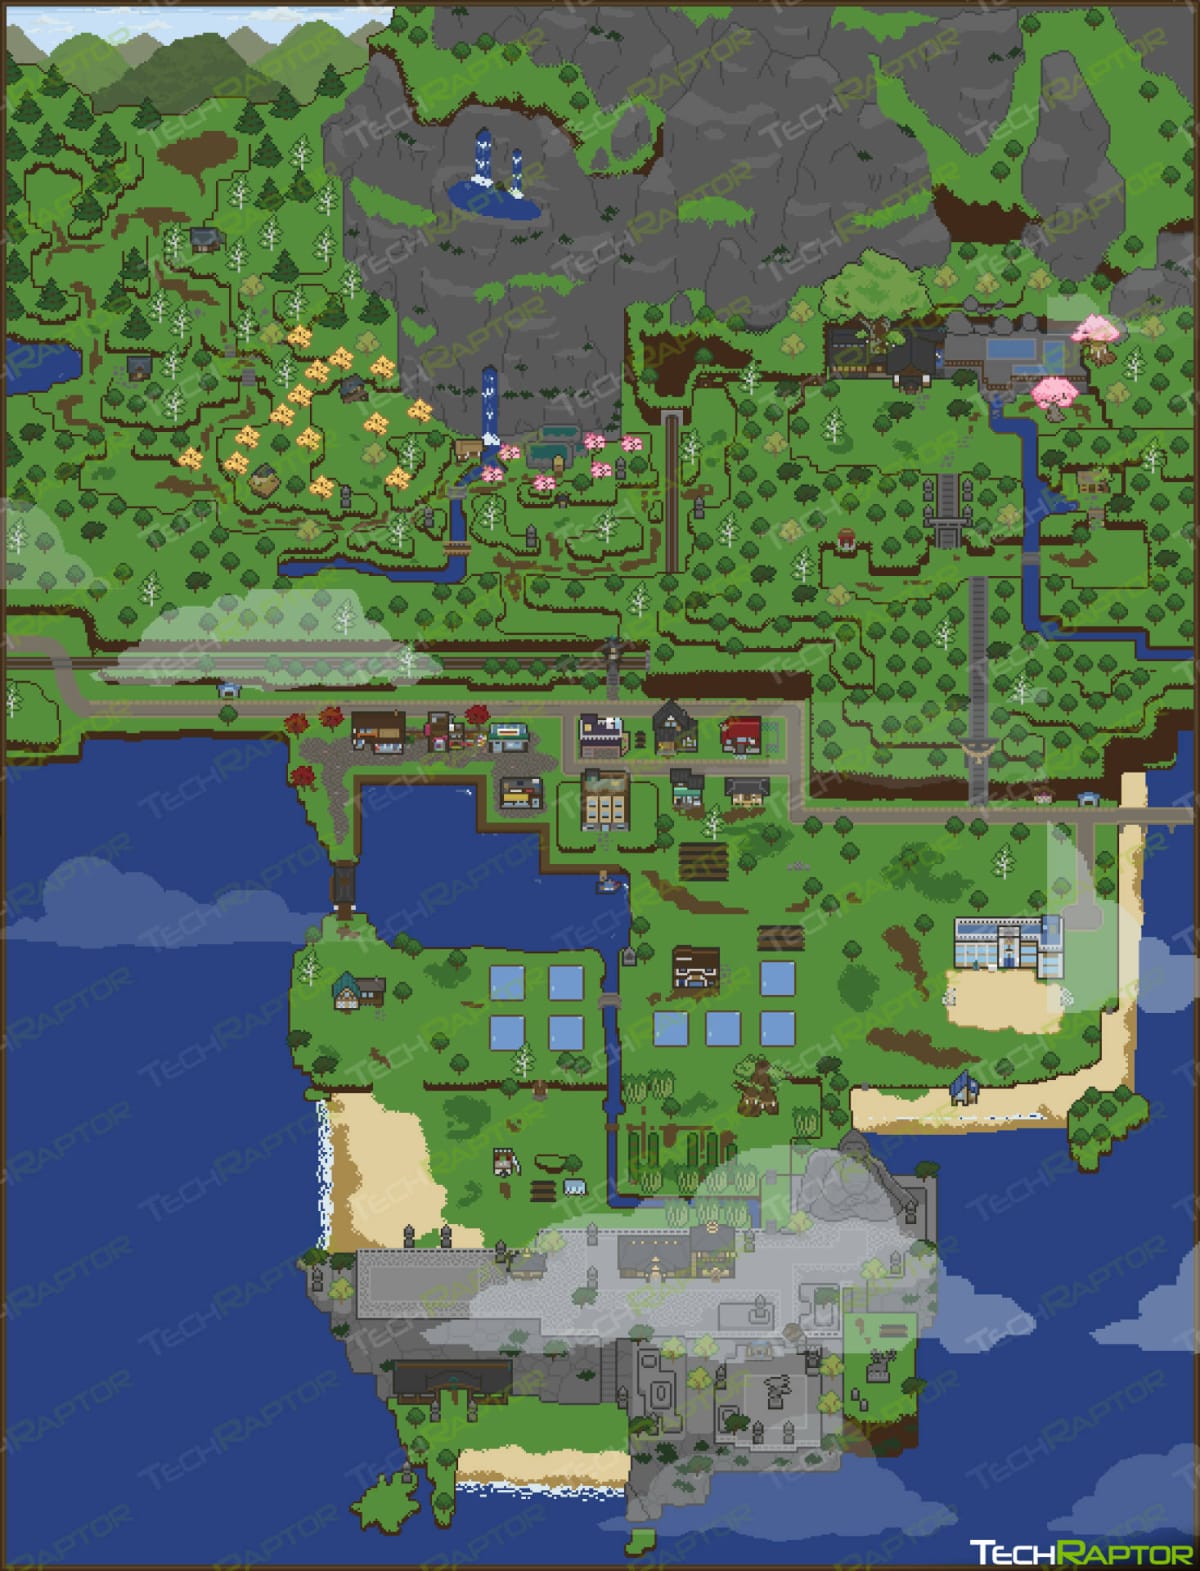 Spirittea Map and Locations Guide - Full Clean Map with No Villagers On It